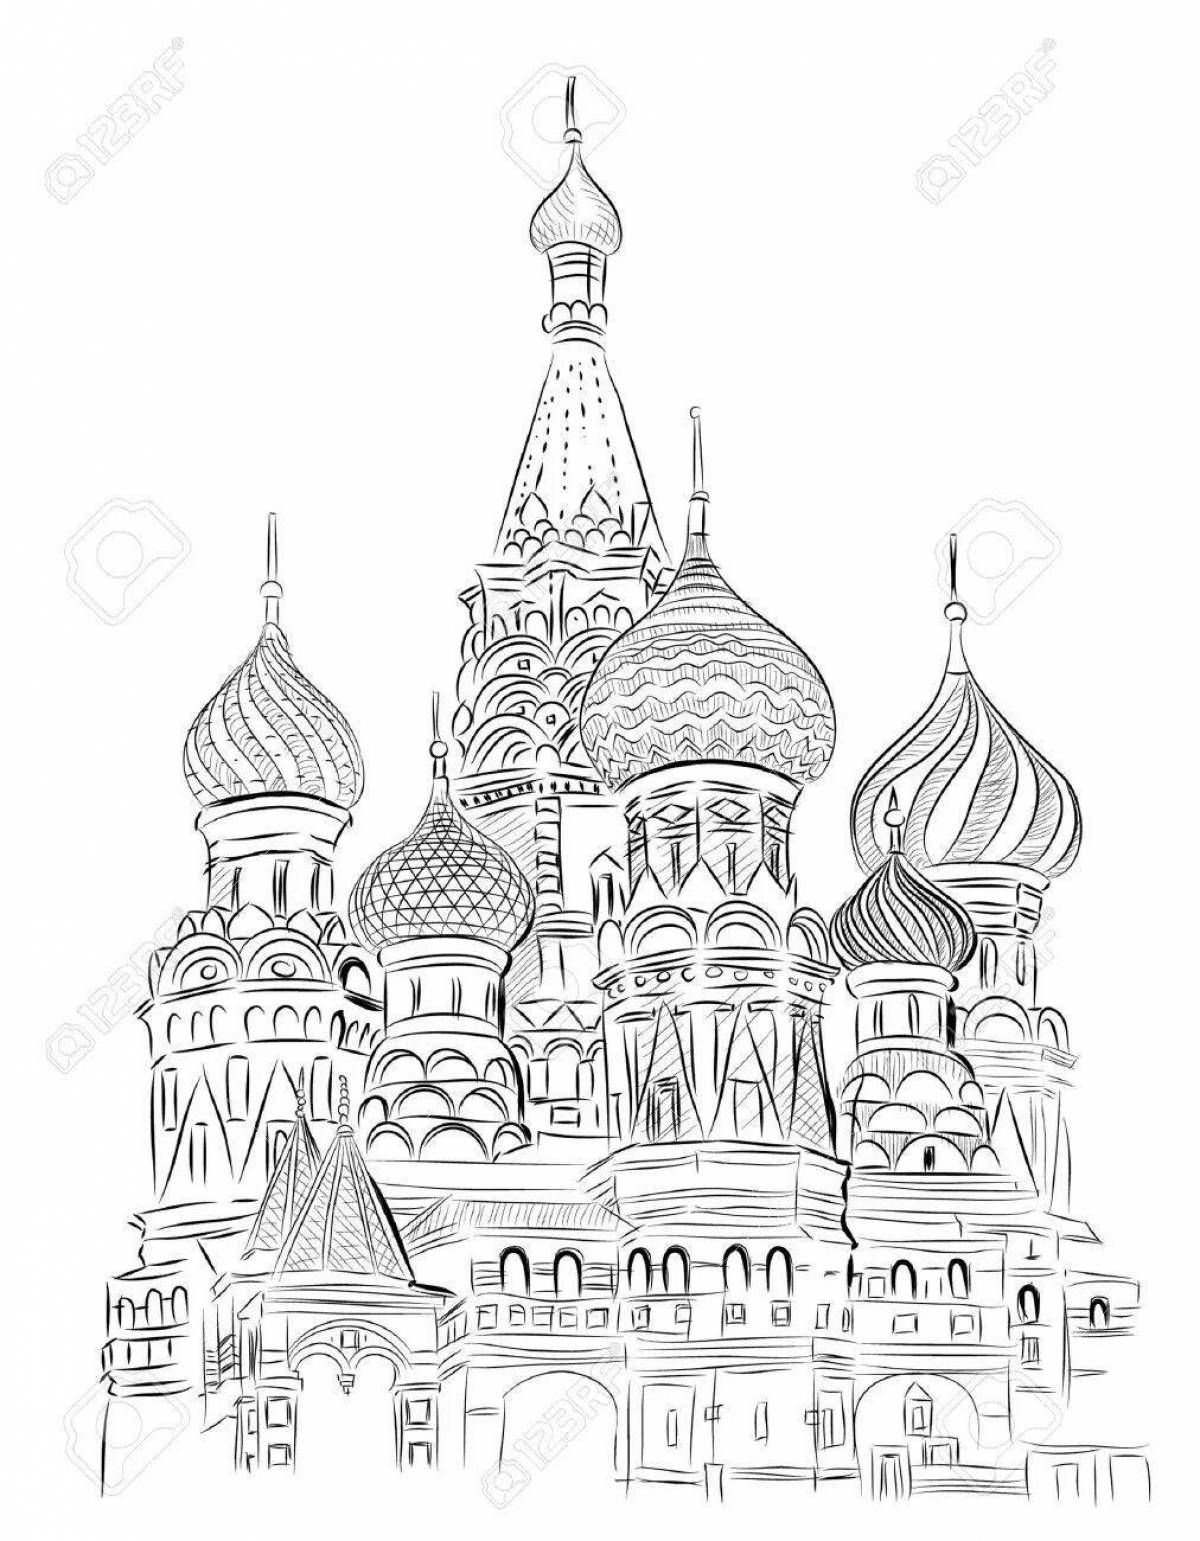 Coloring page of the impressive Saint Basil's Cathedral